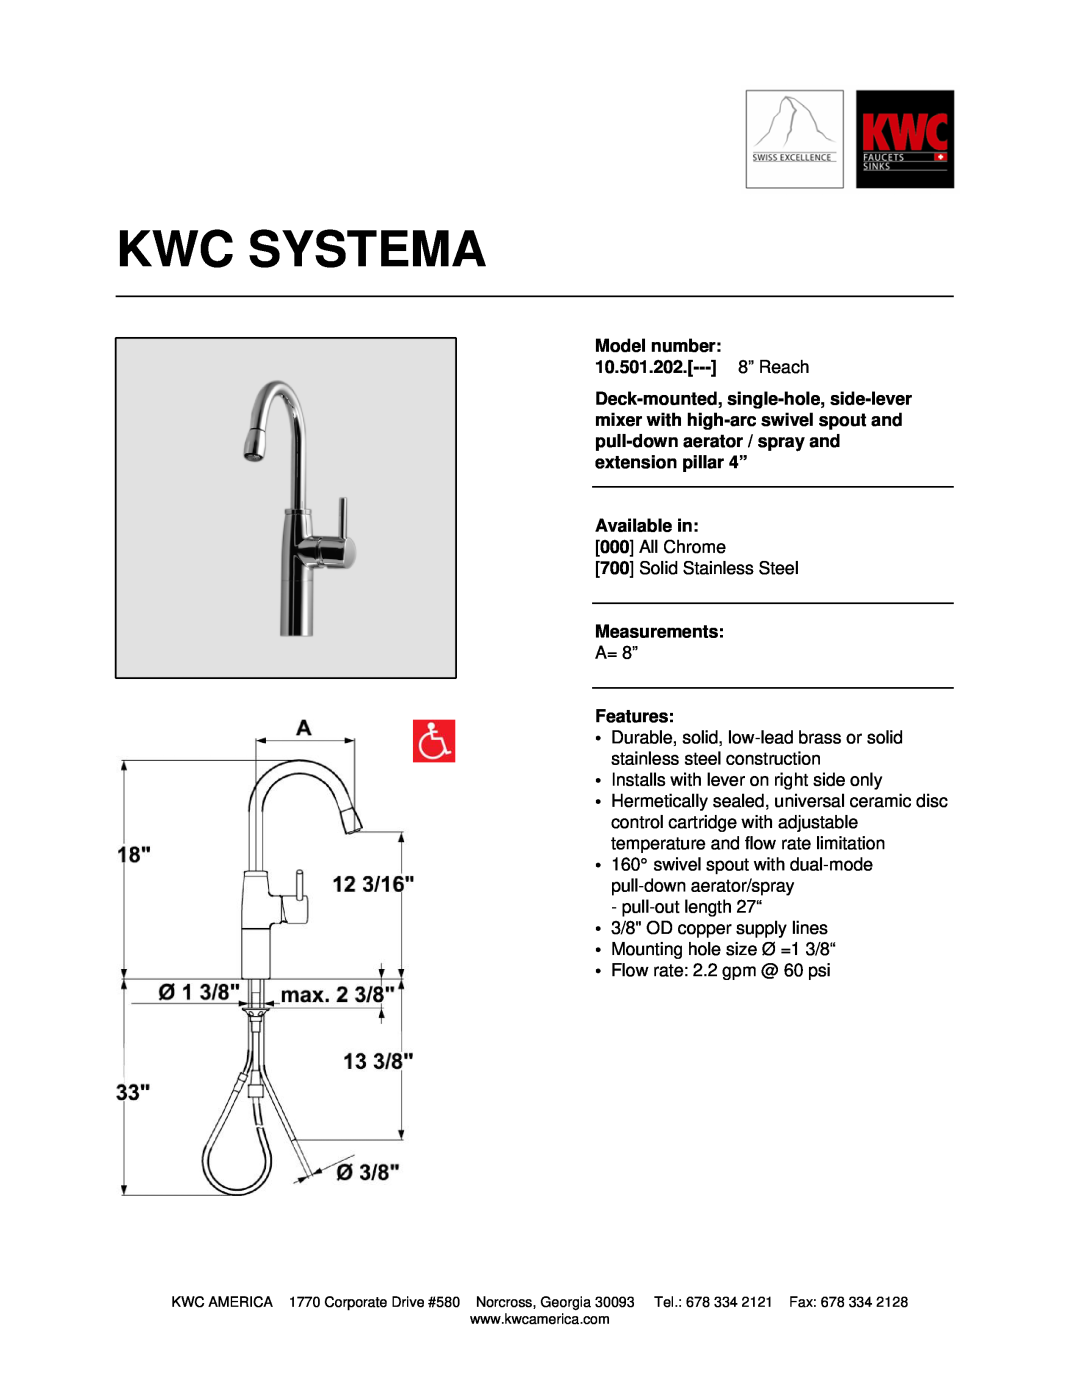 KWC manual Kwc Systema, Model number 10.501.202.--- 8” Reach, Available in, Measurements, Features 